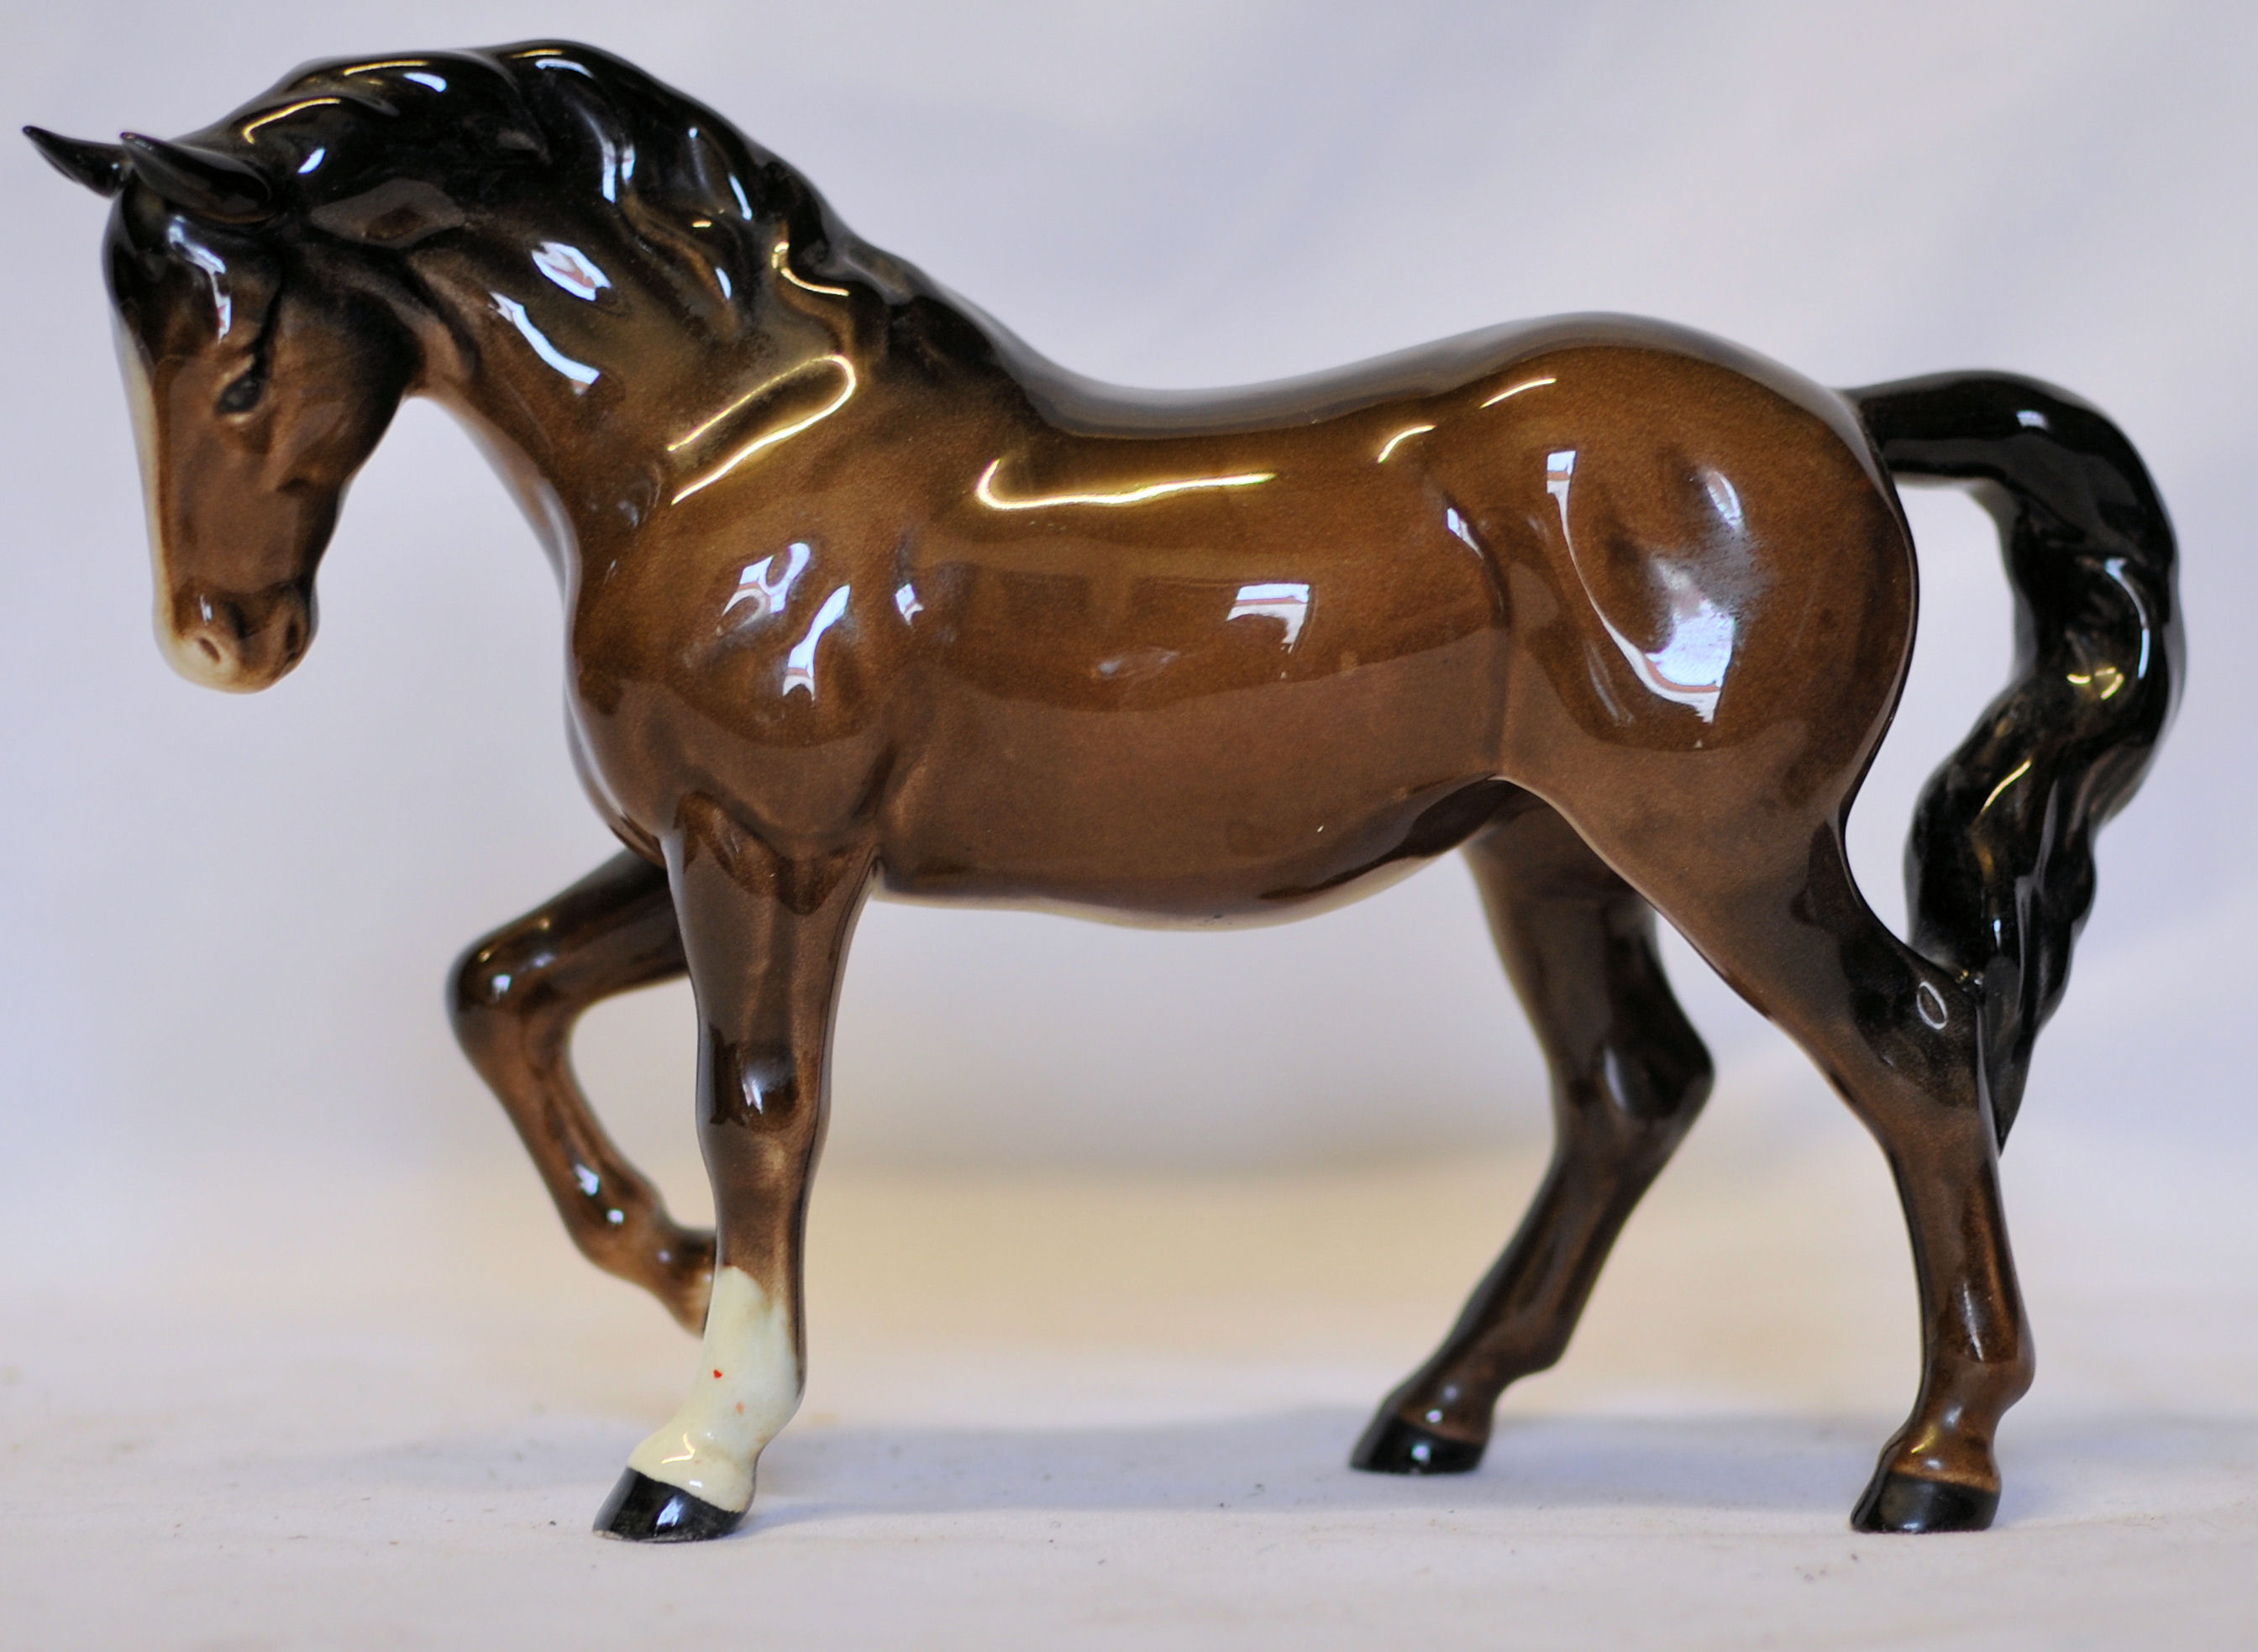 A Beswick stocky jogging brown Mare, no. 855, 3rd version and a Royal Doulton horse.